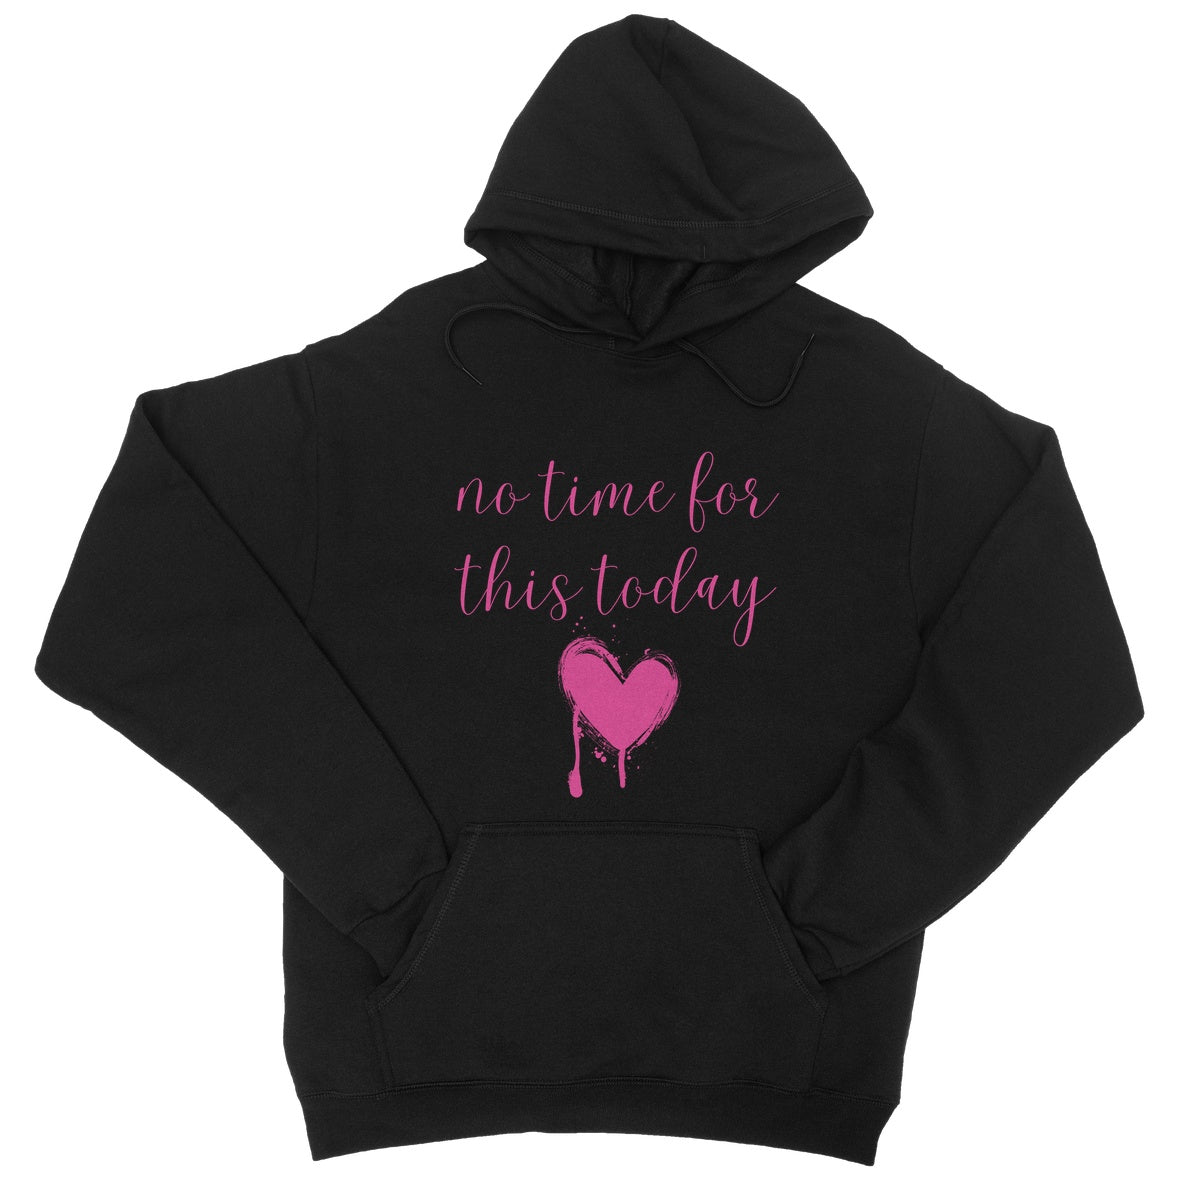 No Time For This Today. Funny Slogan College Hoodie